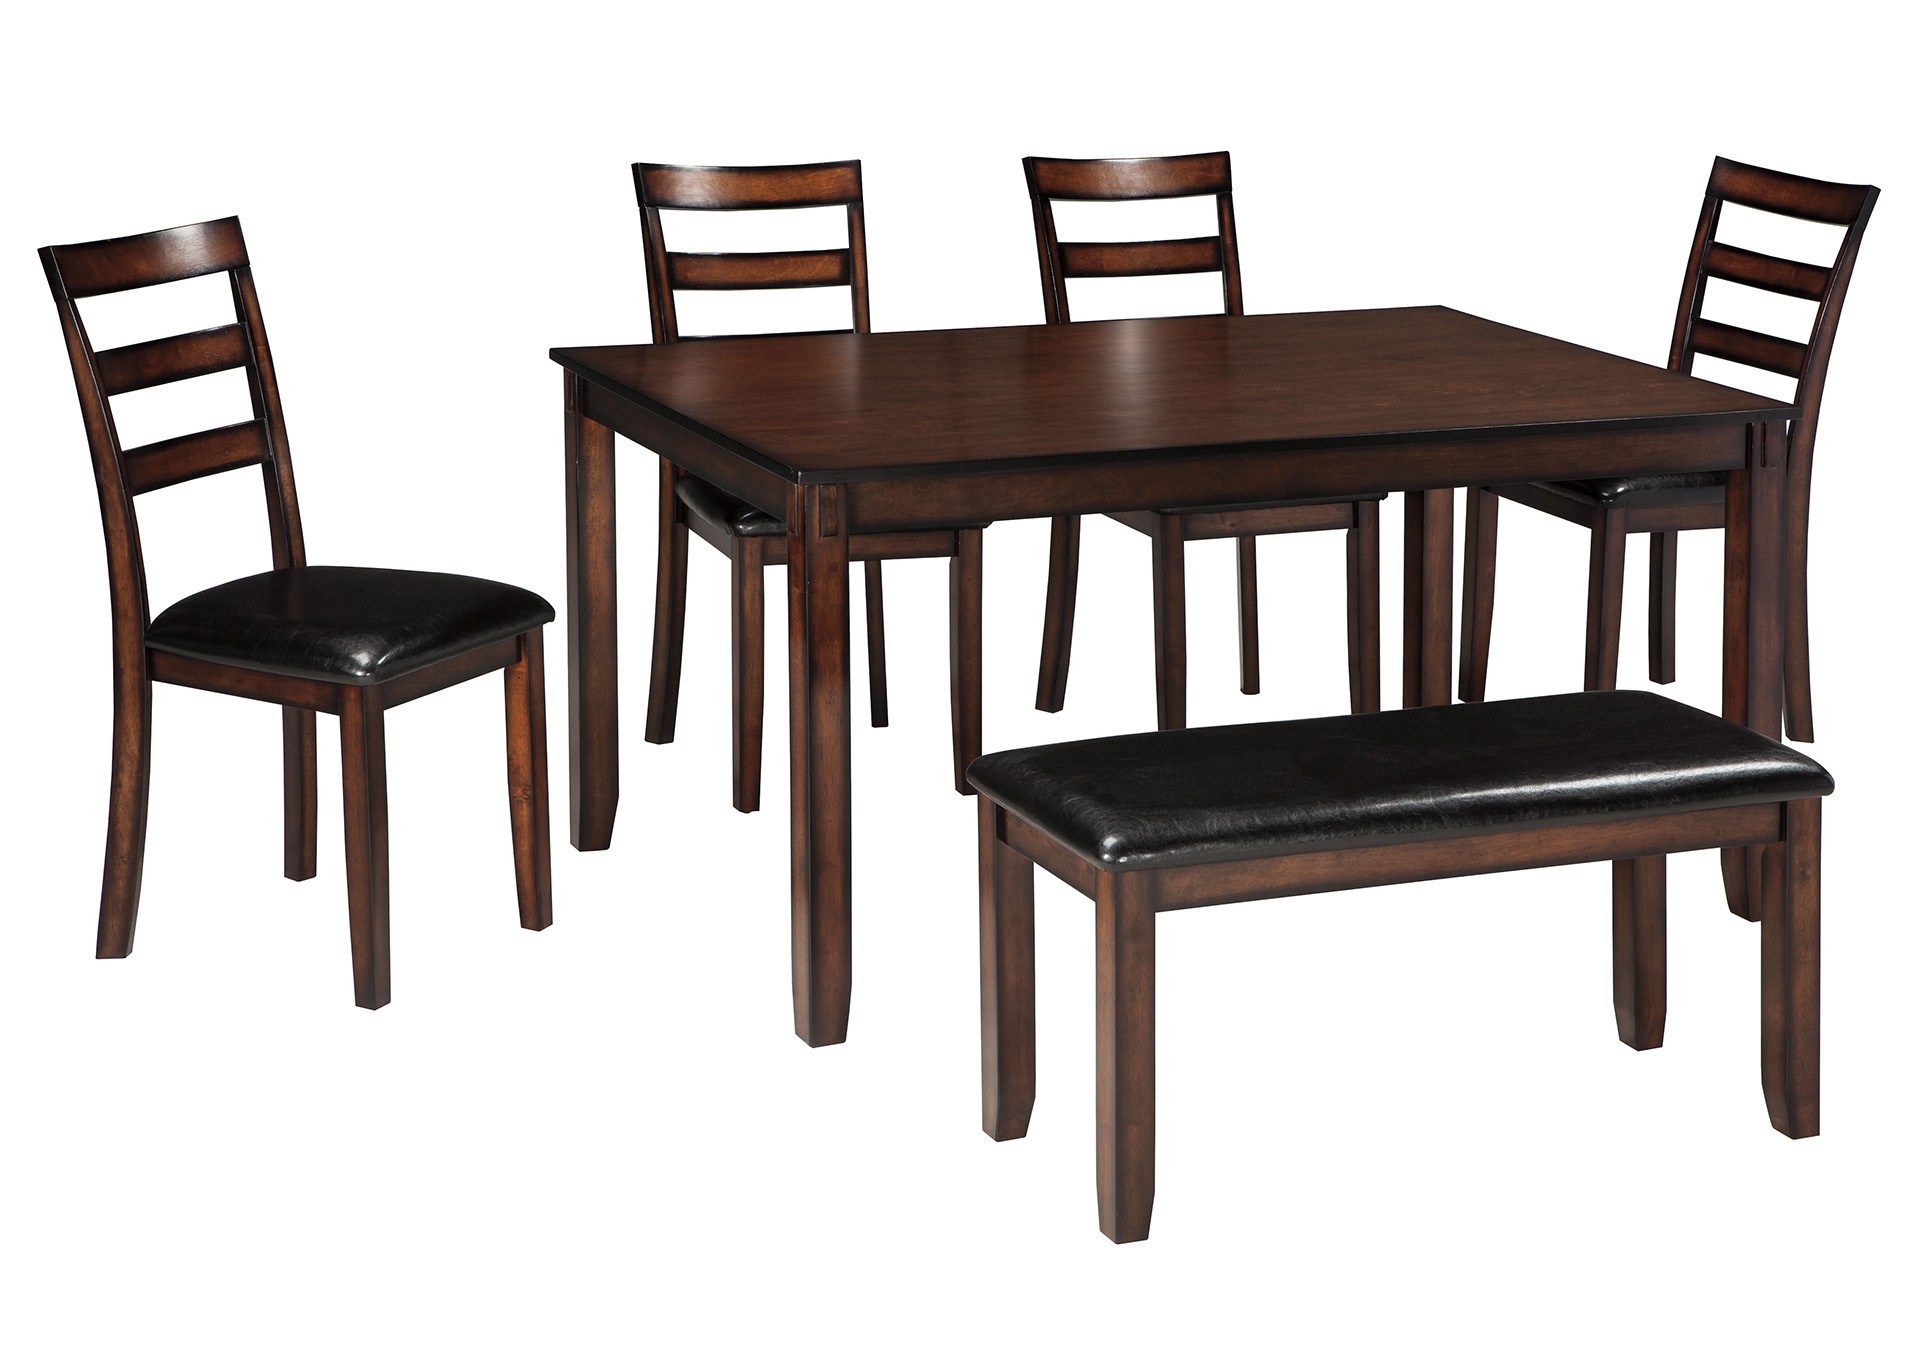 Coviar 6 Piece Dining Set Ivan Smith, Coviar Dining Room Table And Chairs With Bench Set Of 6